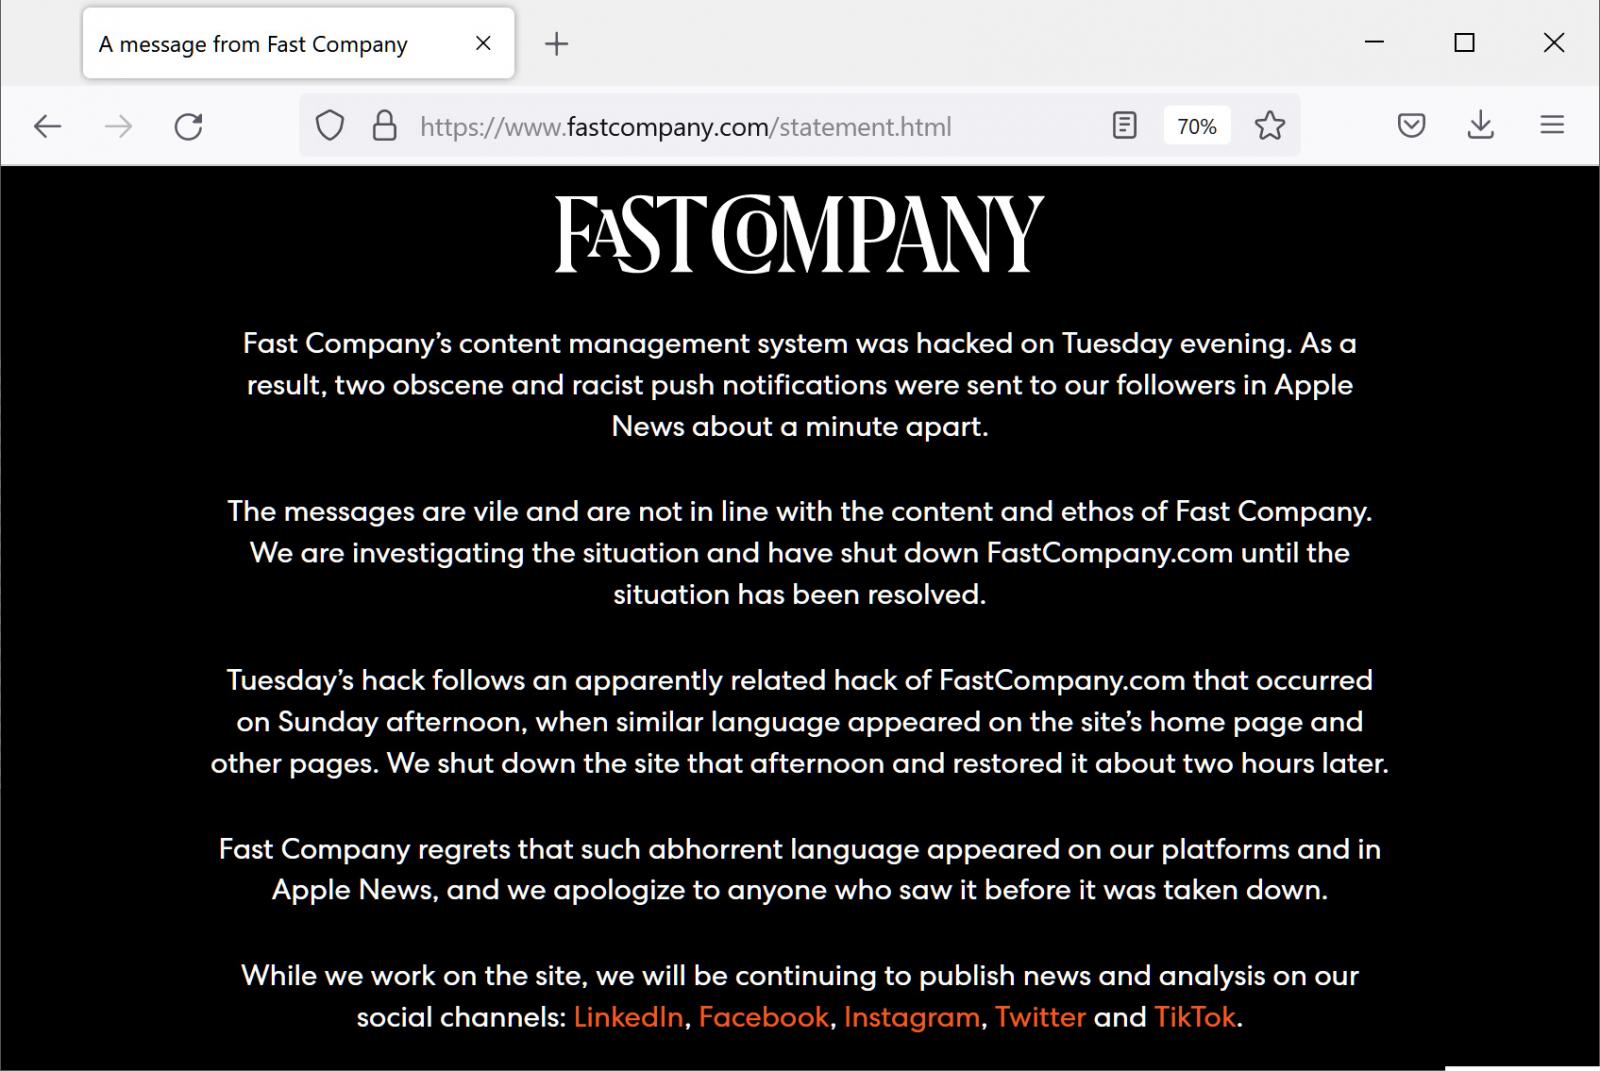 Statement on Fast Company's website